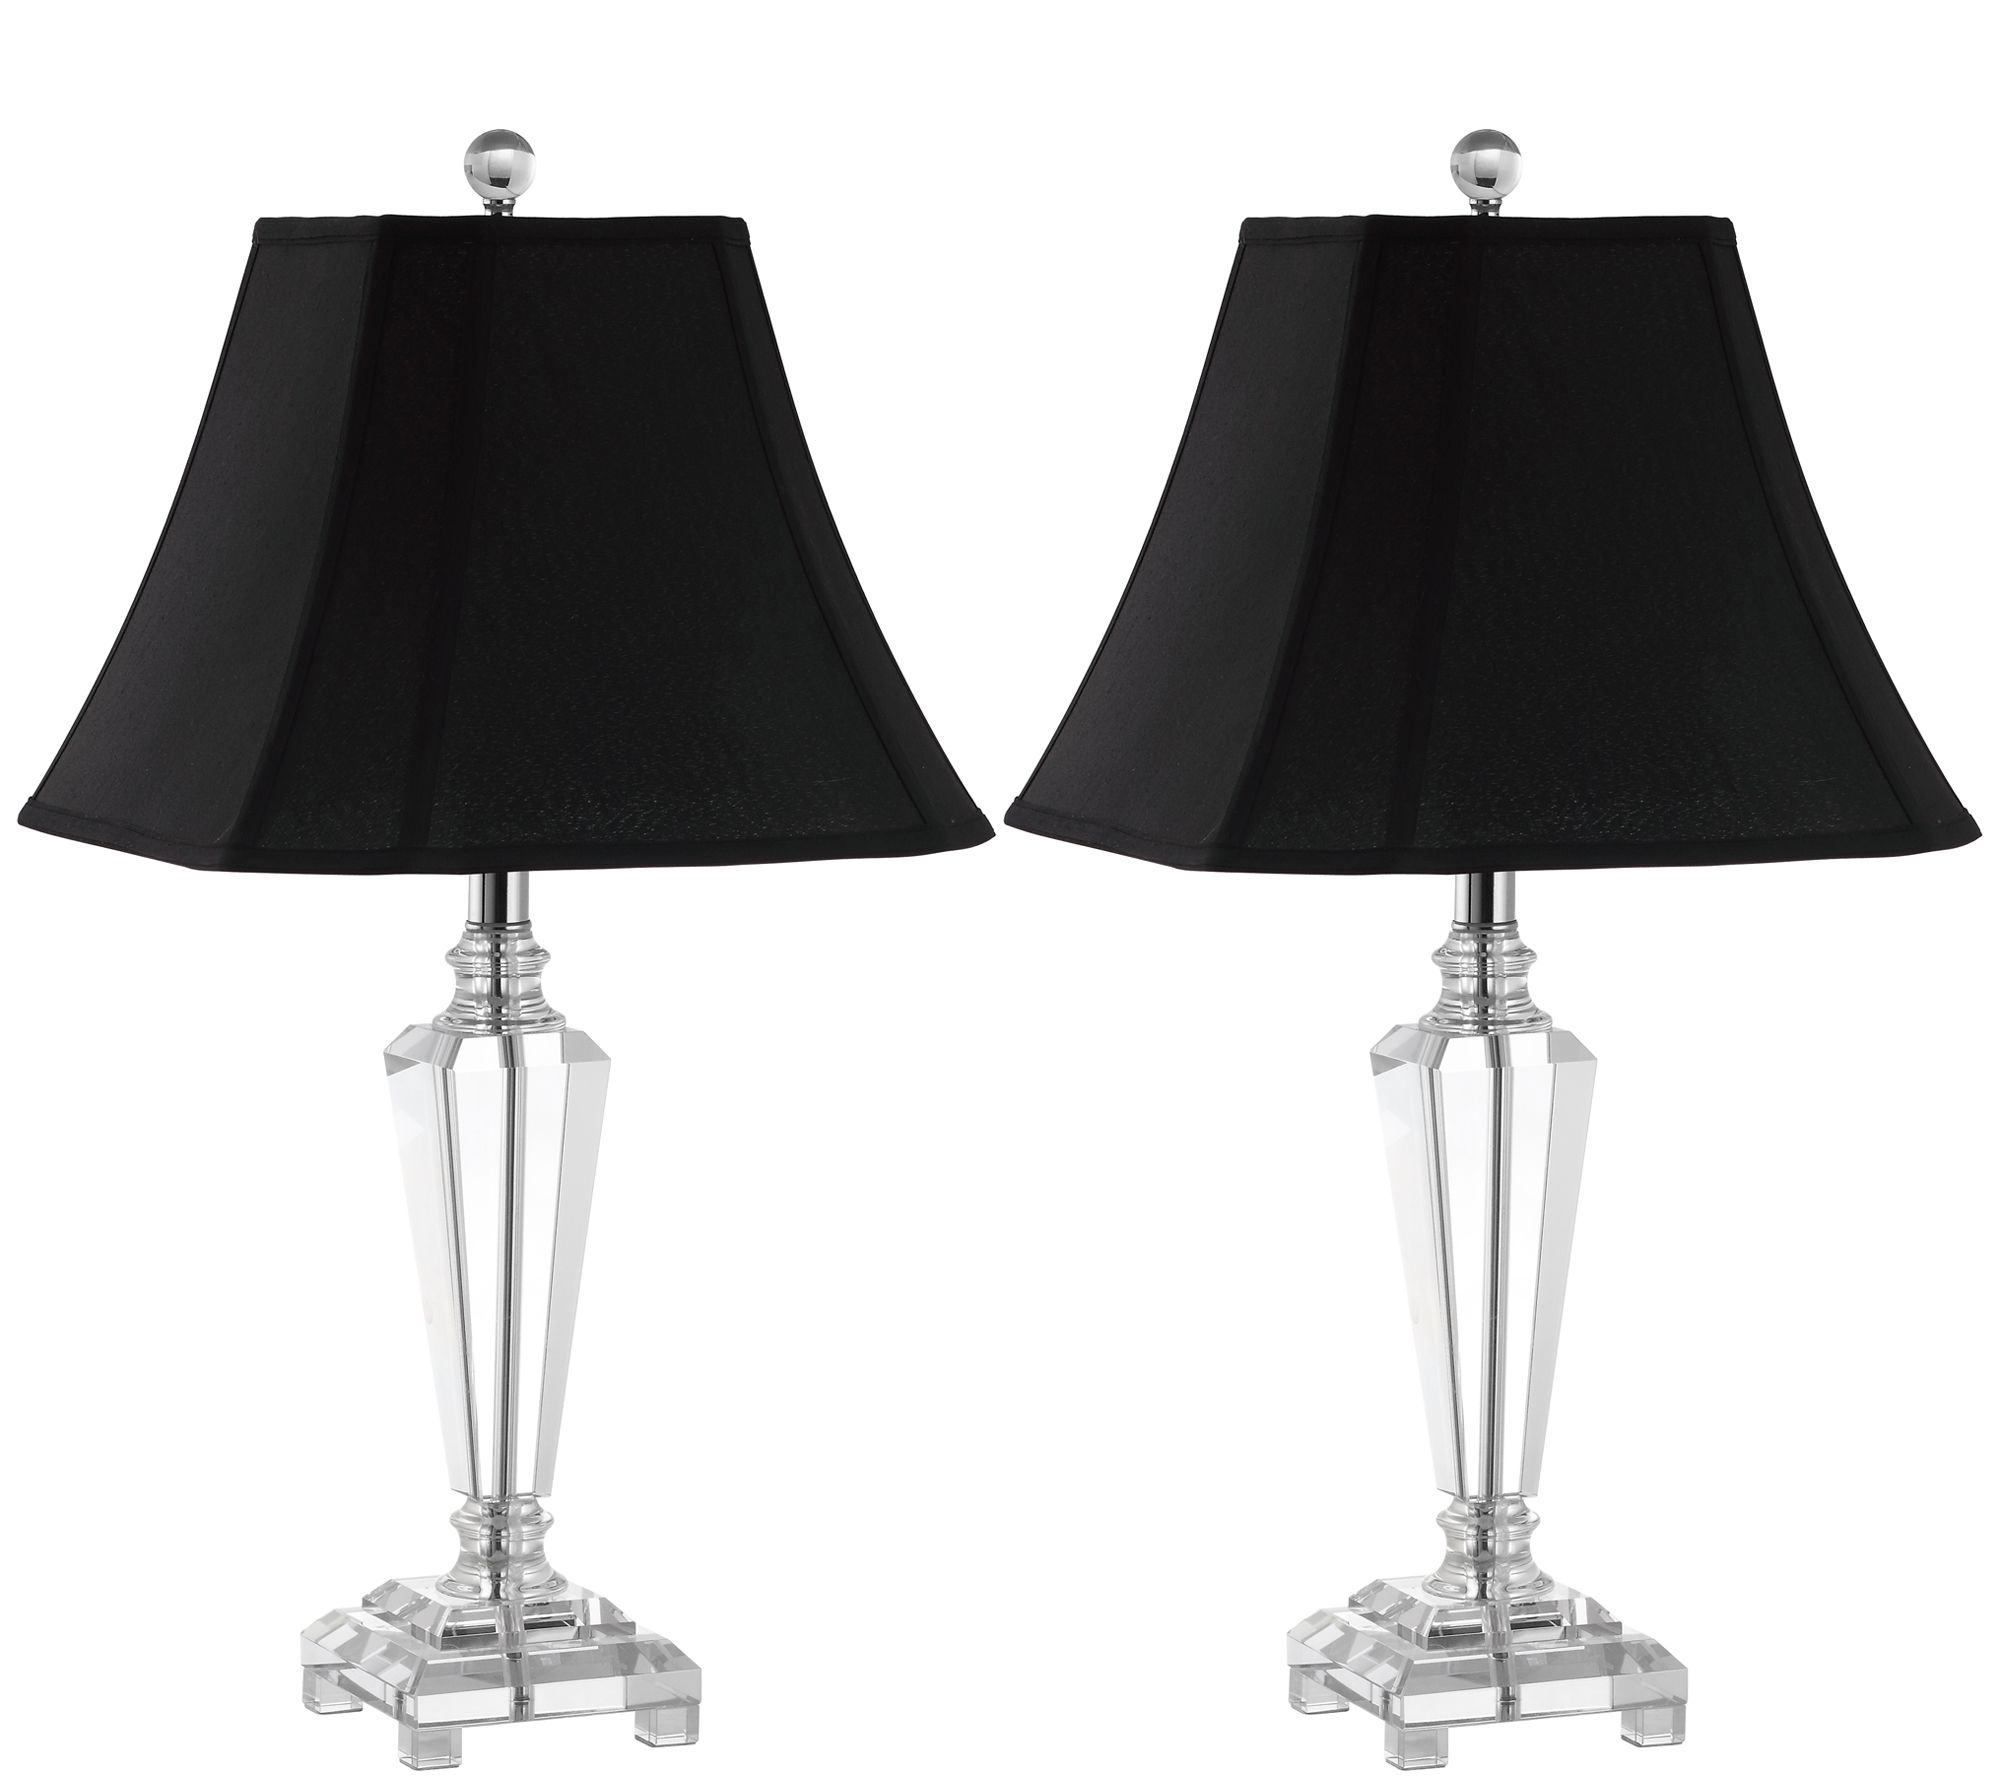 Lilly Crystal Table Lamps Qvc, Safavieh Crystal Table Lamps